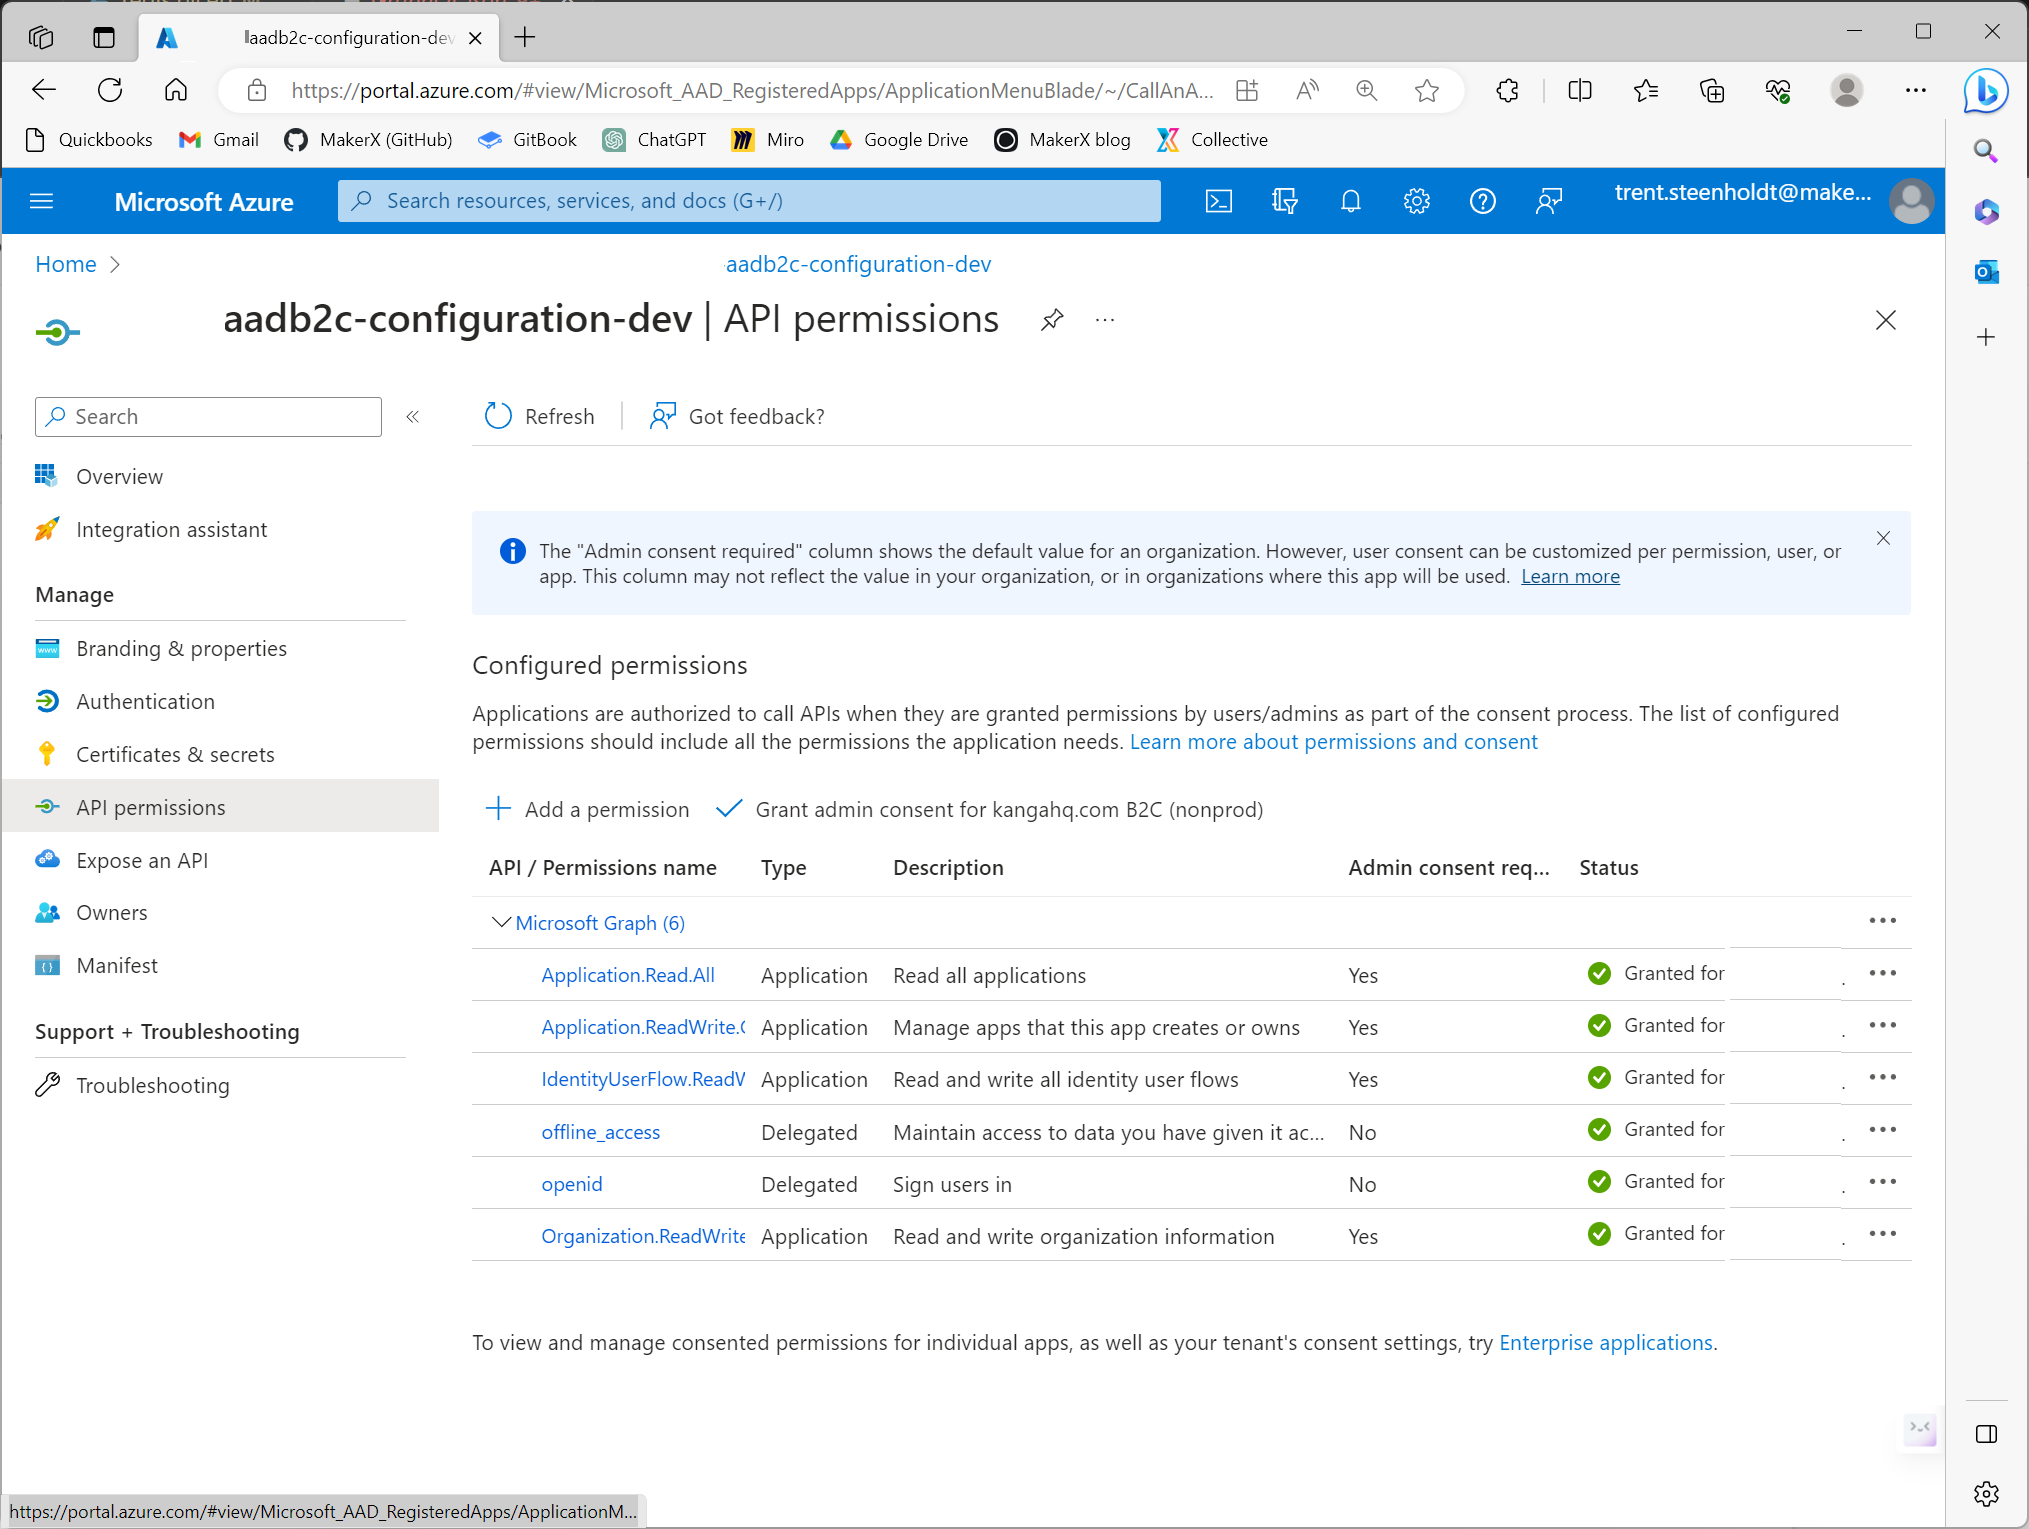 Automating Azure AD B2C tenancy deployments for your app